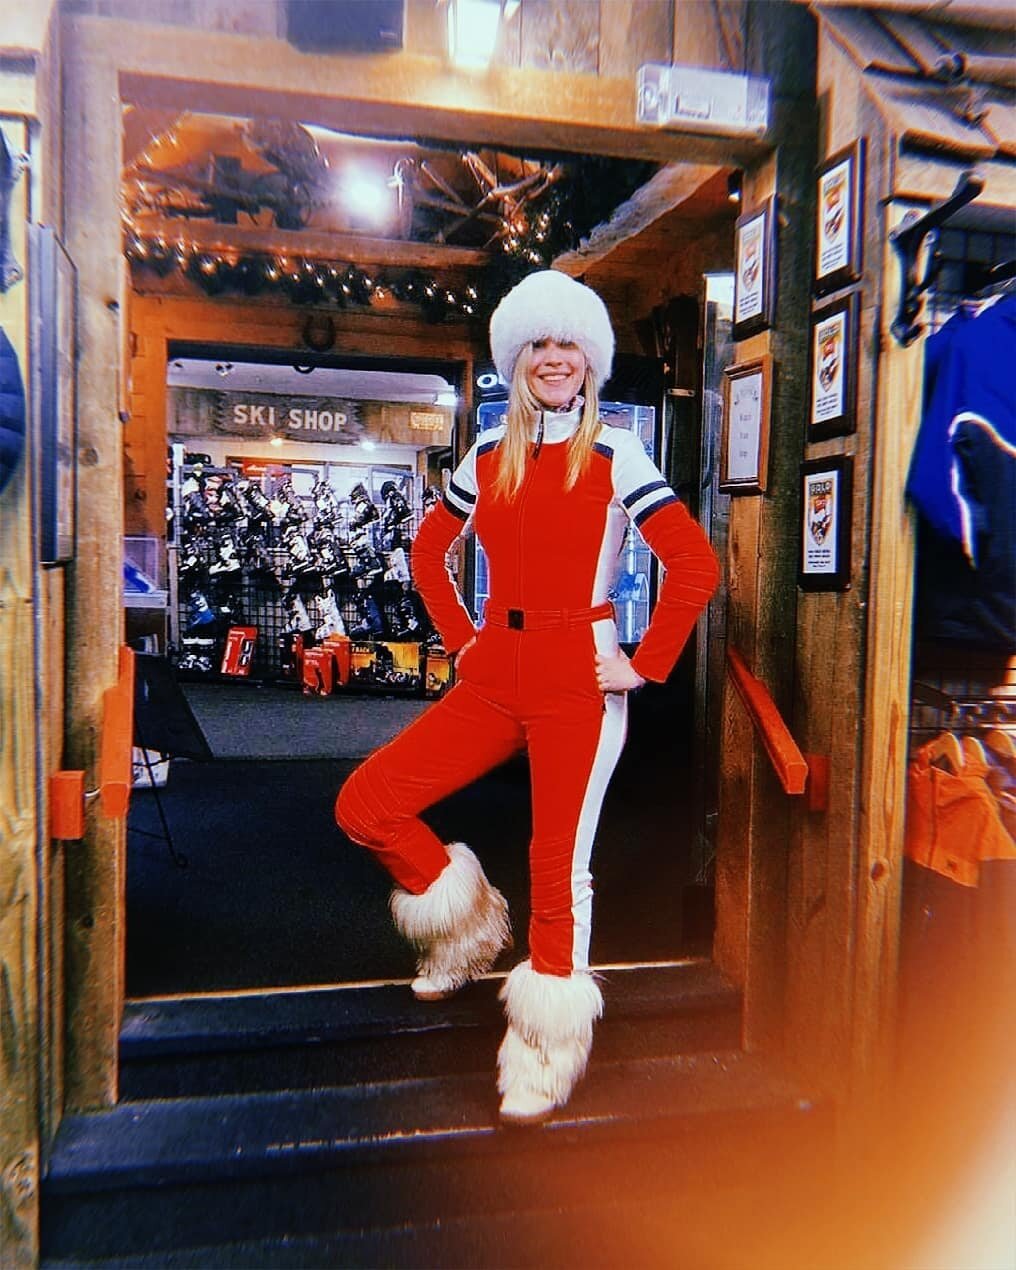 First quiet morning in a while meant I got to try on the ski suit I'd been eyeing all season. It's glorious 😎 🎿
.
.
&amp; don't worry, I only pulled my mask down for the picture real quick 😷 We keep it safe around the shop 🙏
.
.
.
#skishoplife #s